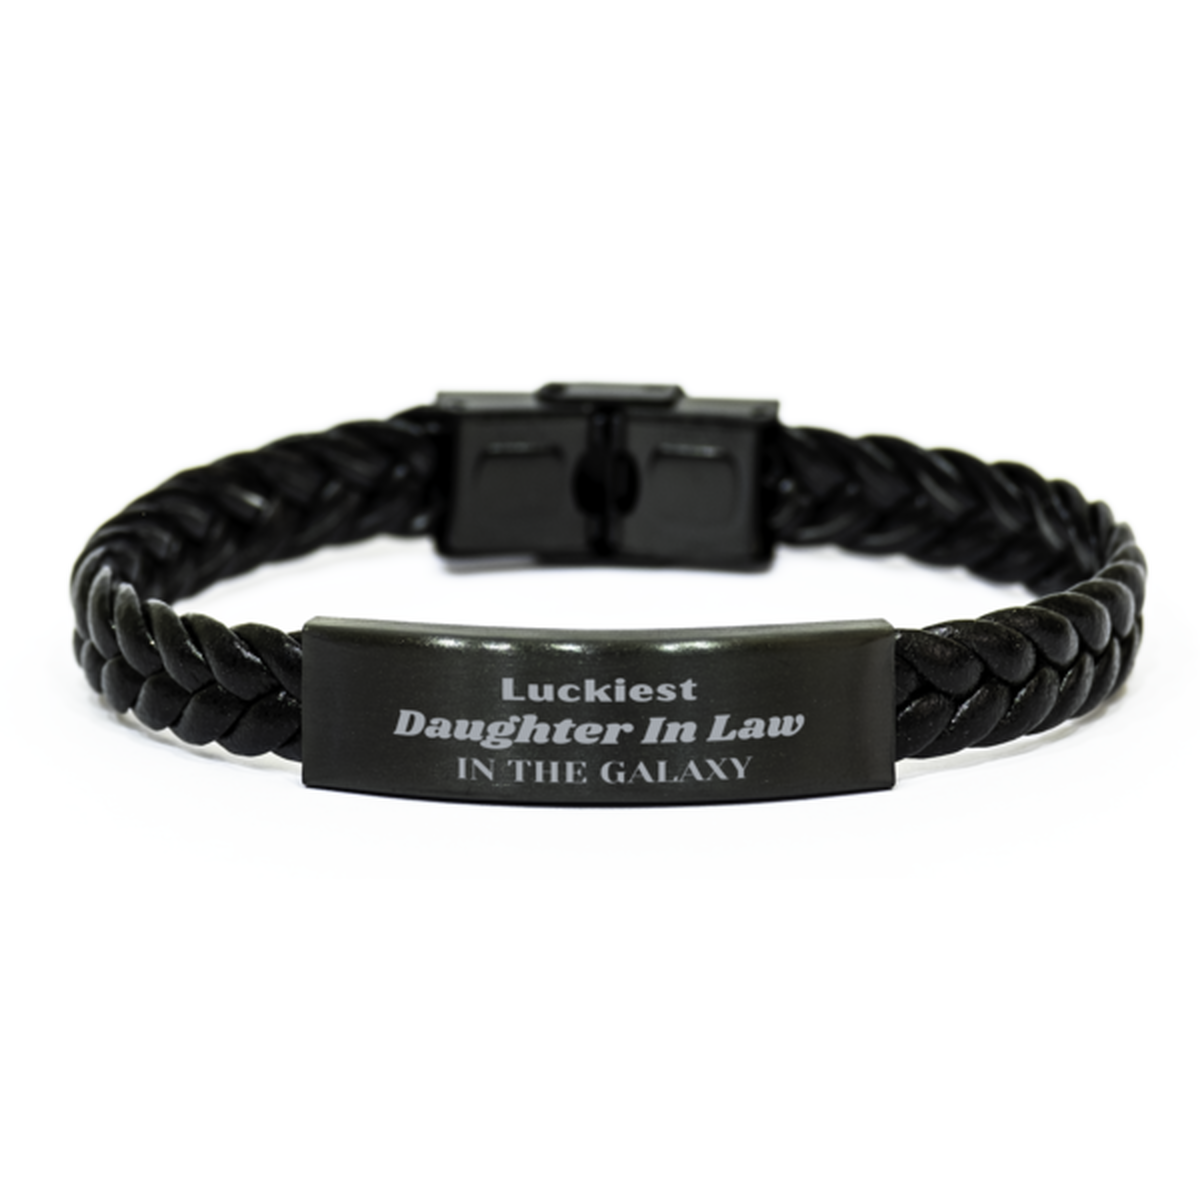 Luckiest Daughter In Law in the Galaxy, To My Daughter In Law Engraved Gifts, Christmas Daughter In Law Braided Leather Bracelet Gifts, X-mas Birthday Unique Gifts For Daughter In Law Men Women